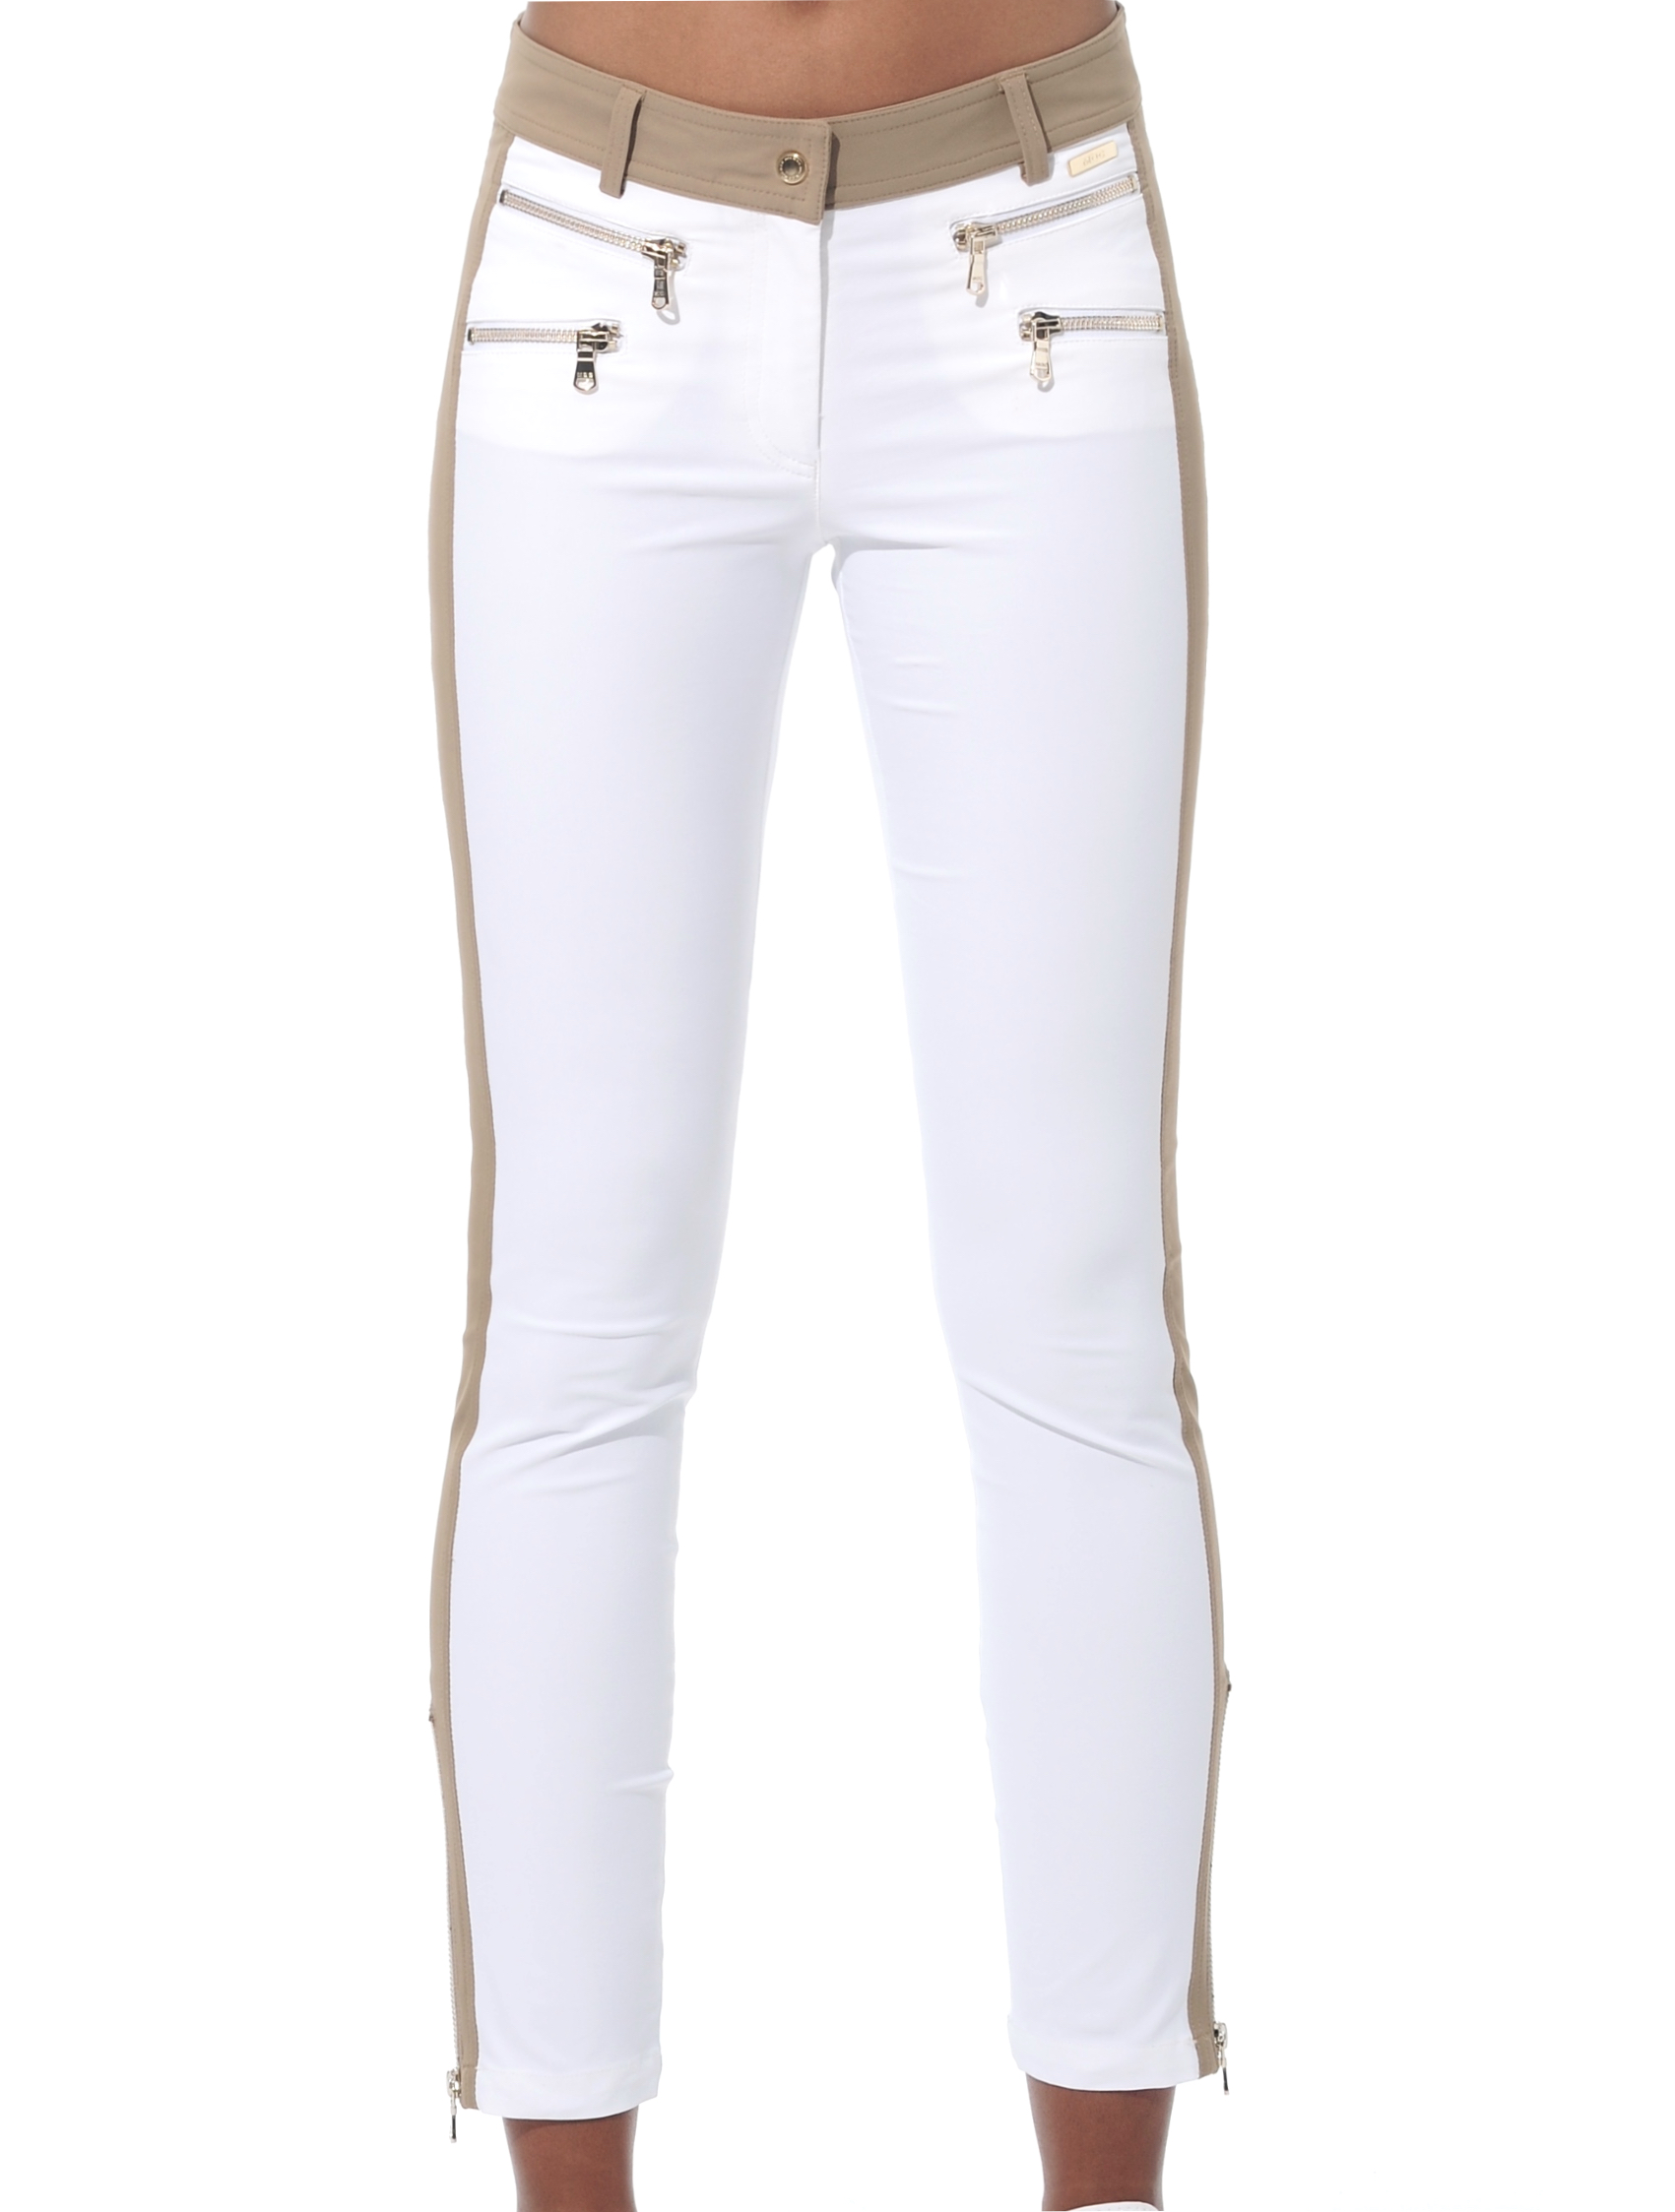 4way stretch double zip ankle pants white/chestnut 